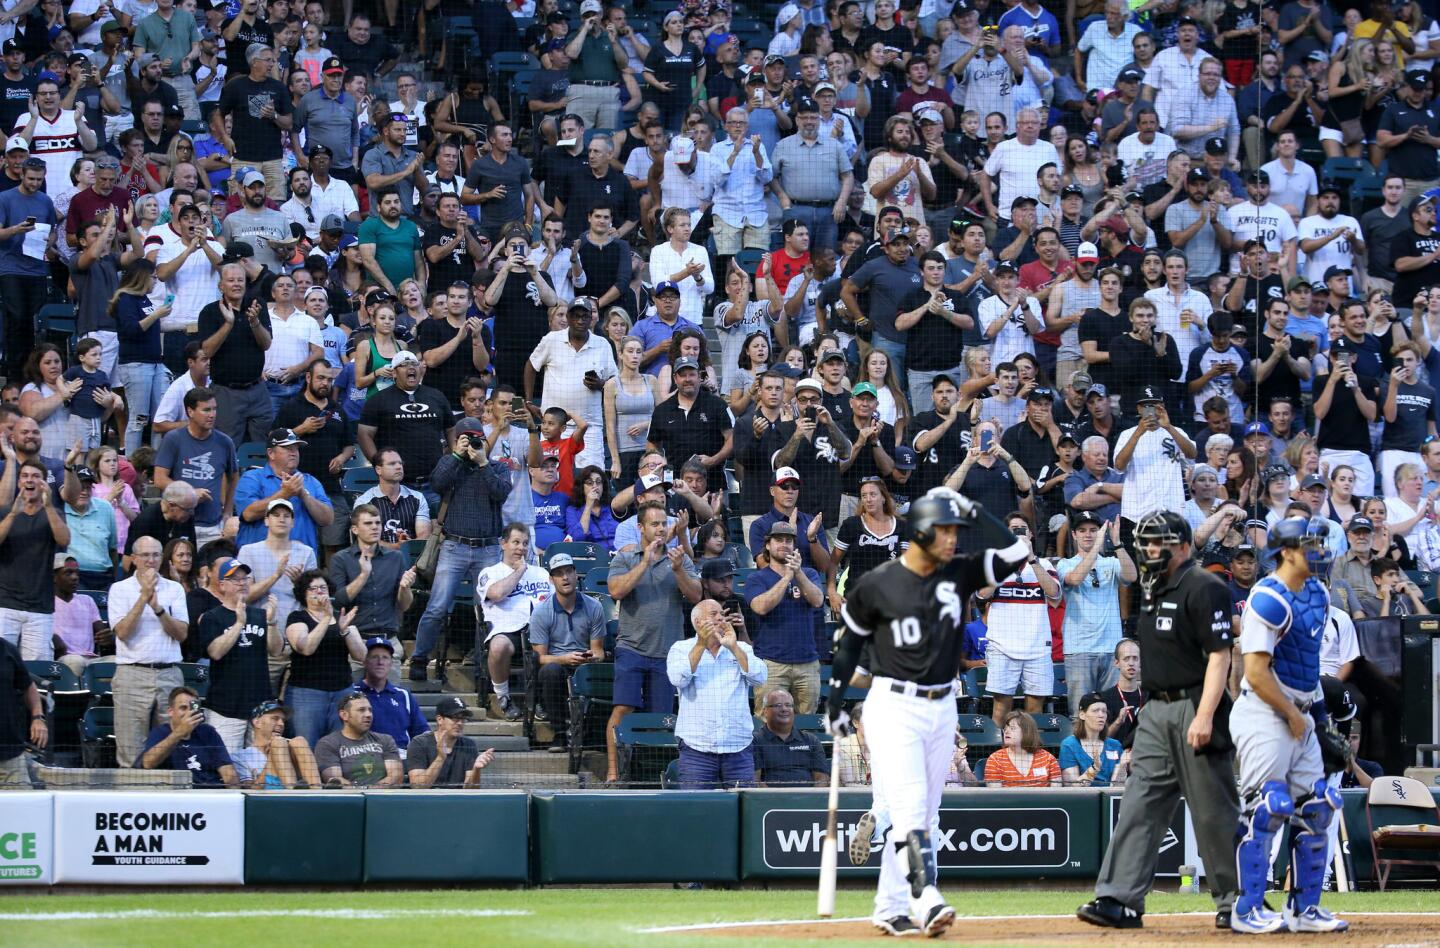 White Sox second baseman Yoan Moncada receives a standing ovation as he comes to bat in the second inning against the Los Angeles Dodgers at Guaranteed Rate Field on July 19, 2017.